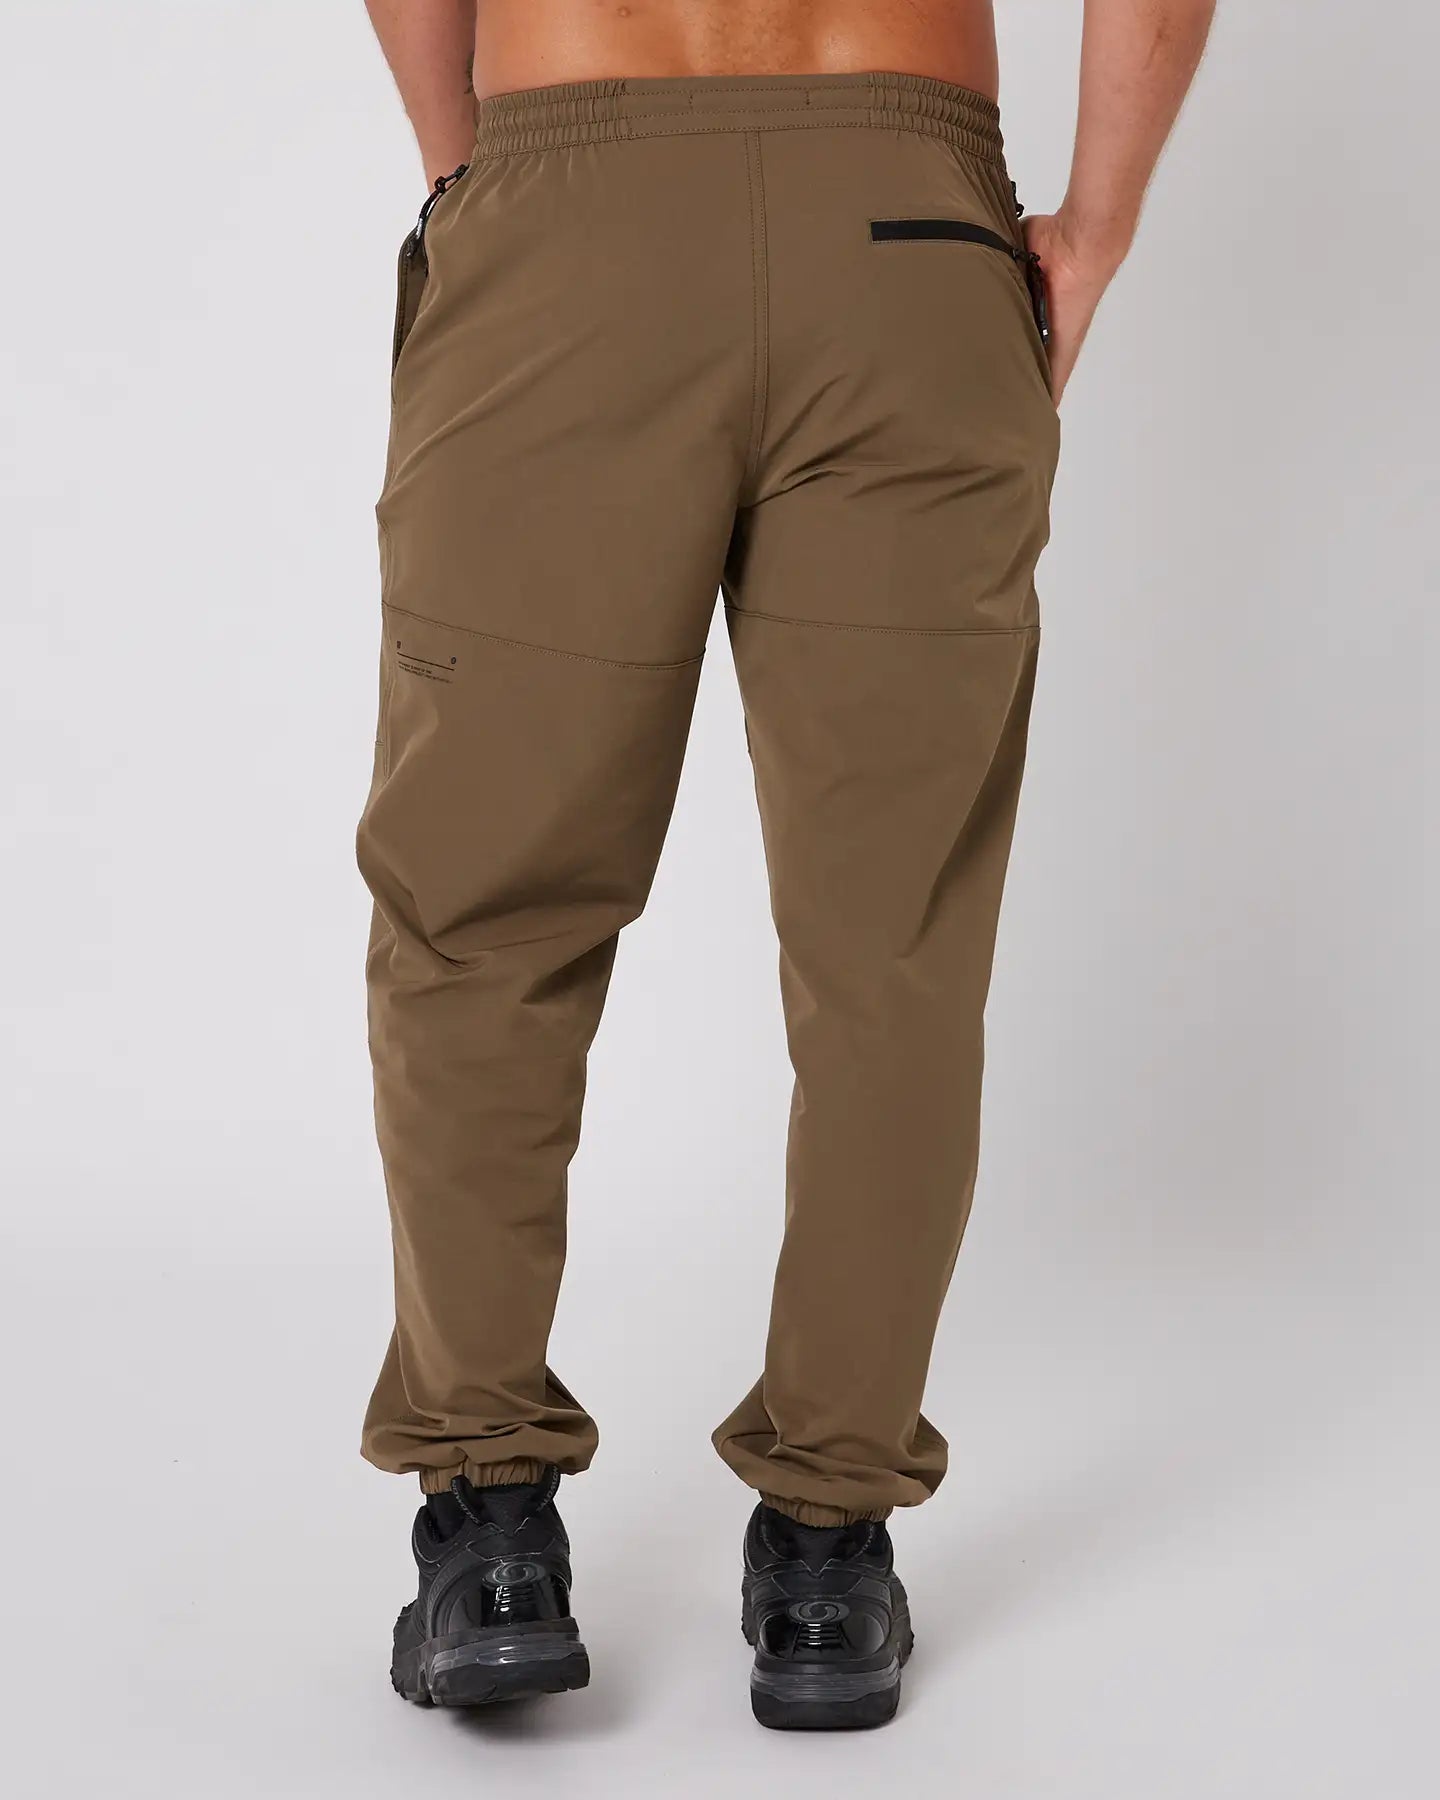 Follow All Day Pants - Deep Taupe 5